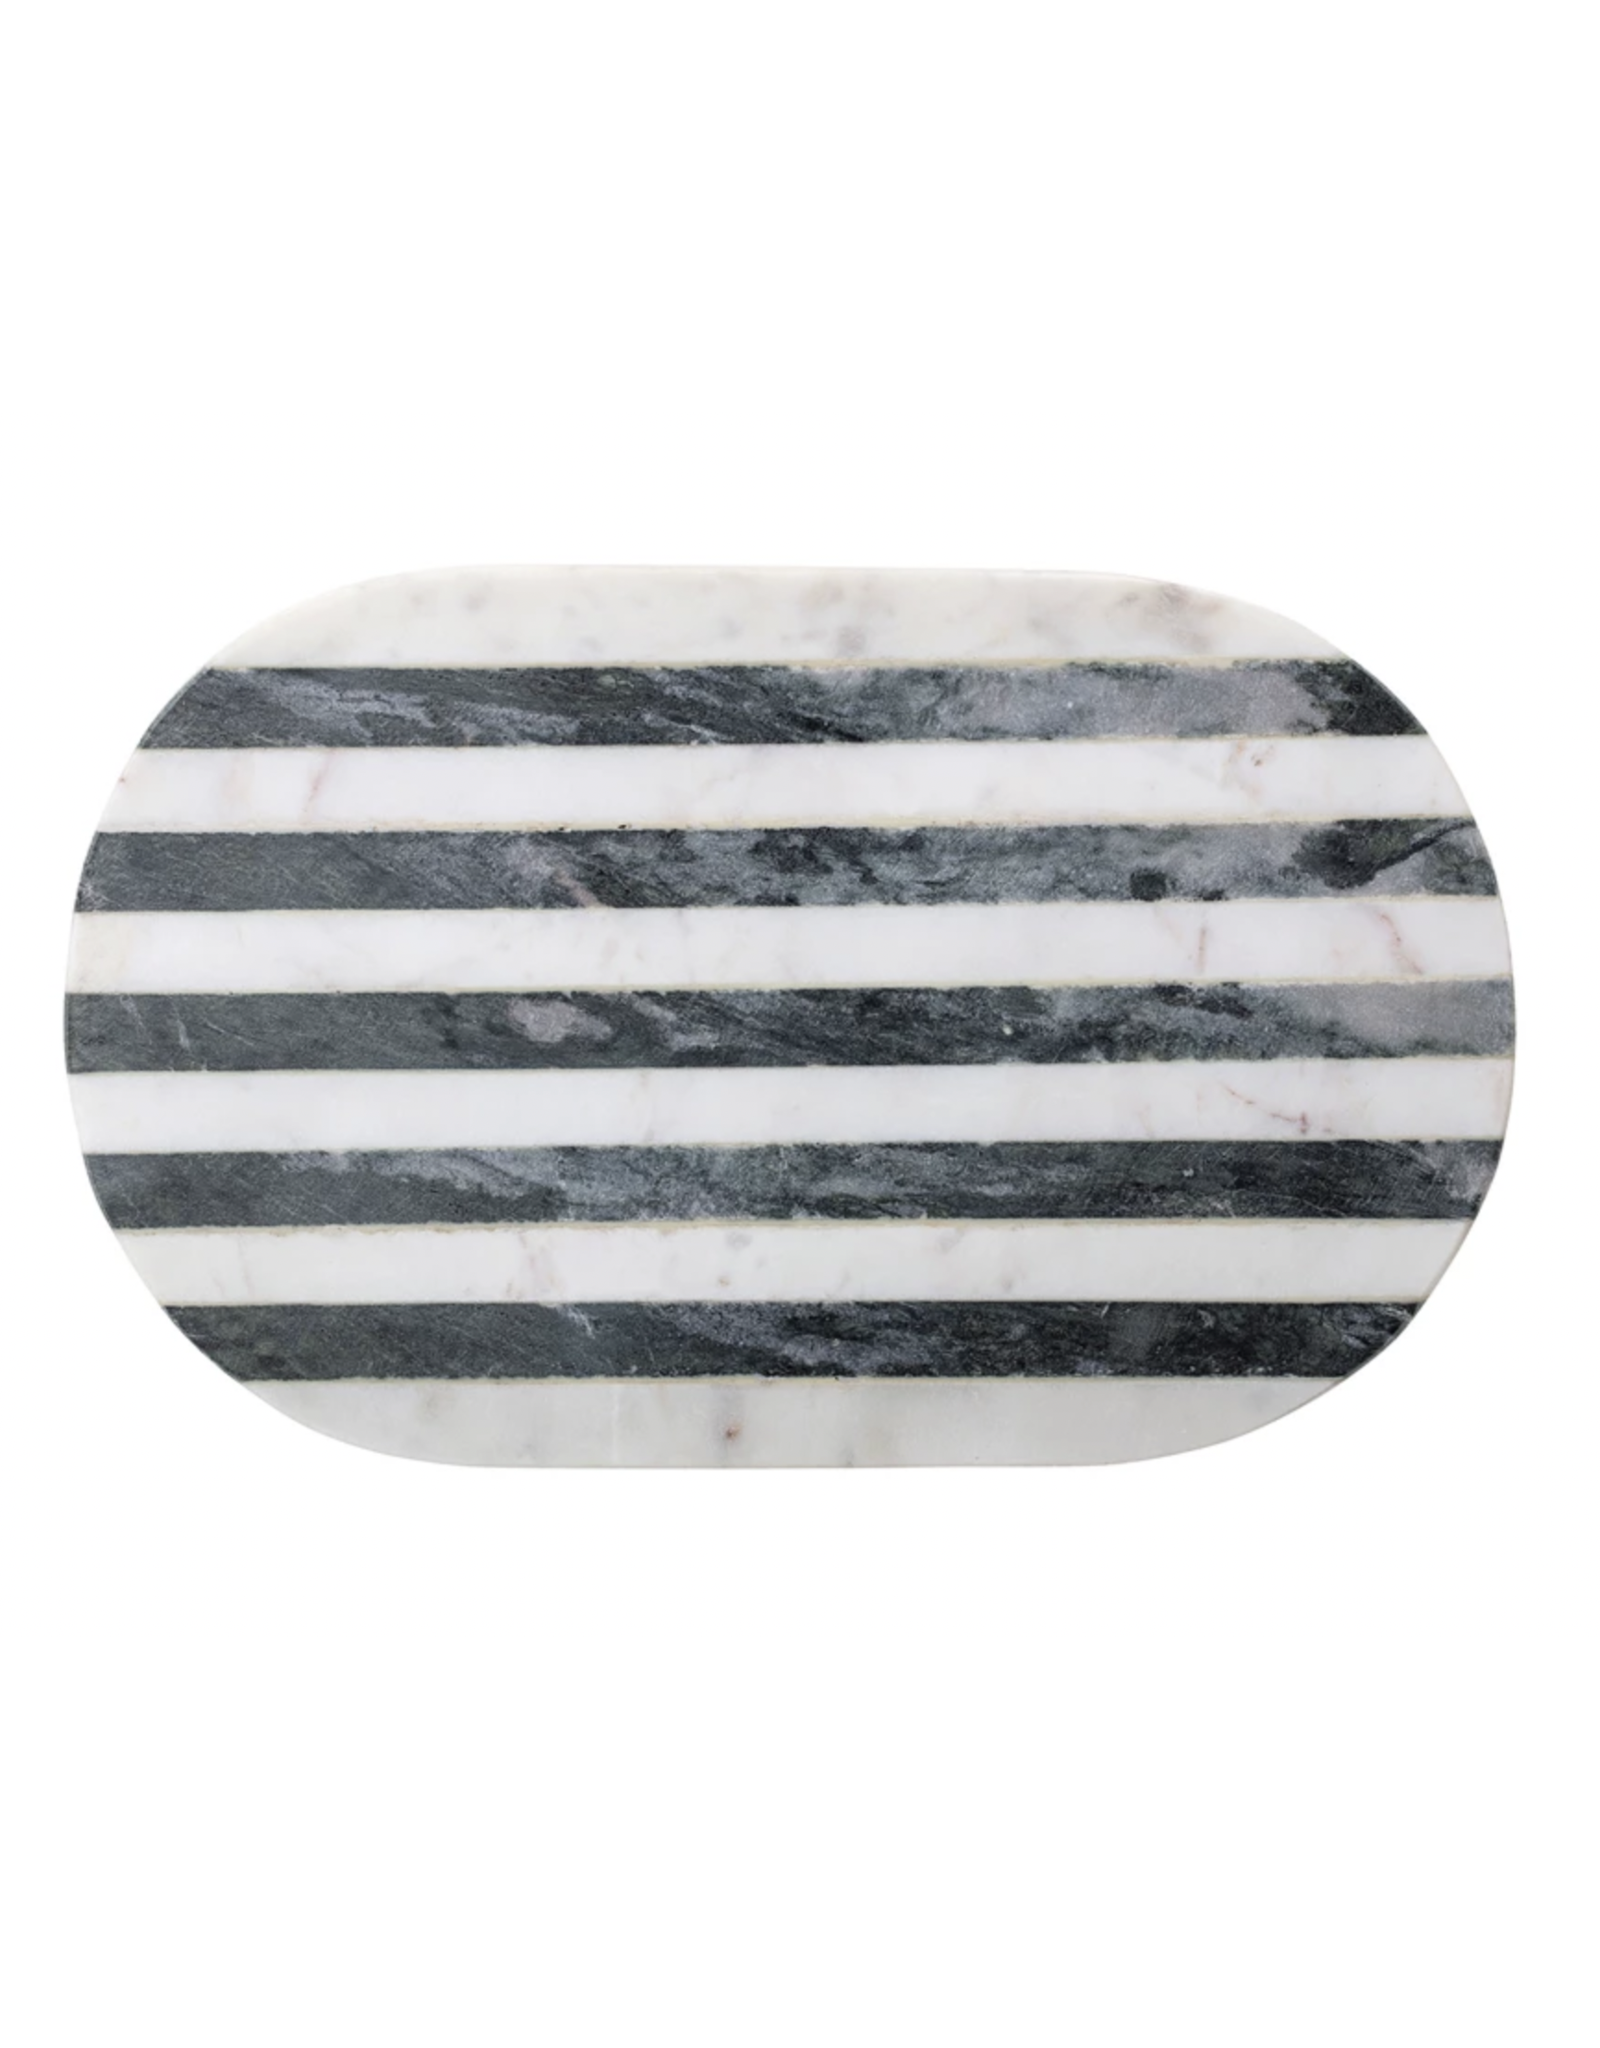 Bloomingville Marble Tray Cutting Board, Black & White